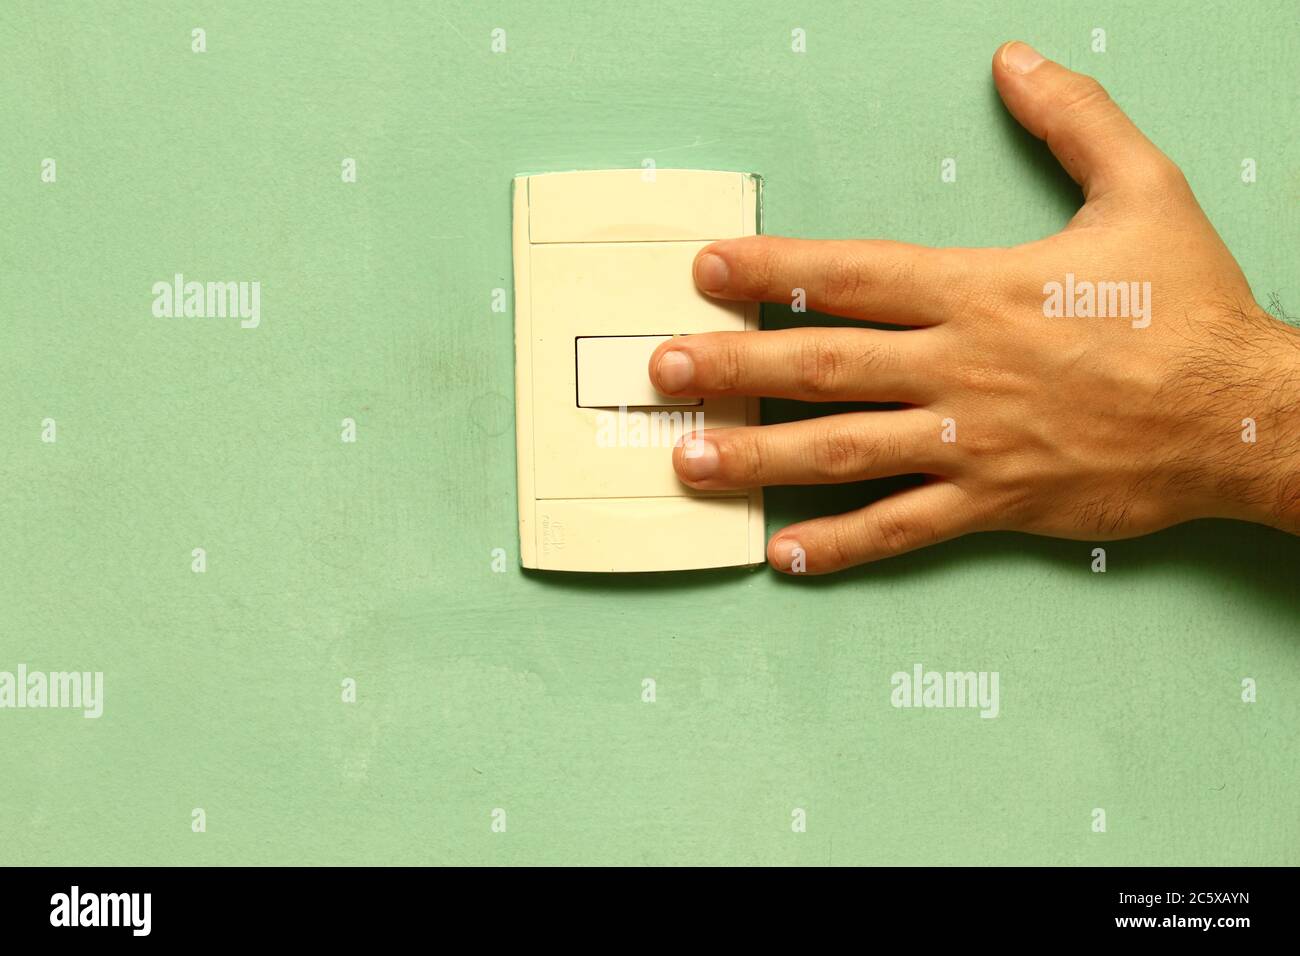 left hand touching a power switch on a green wall. Stock Photo